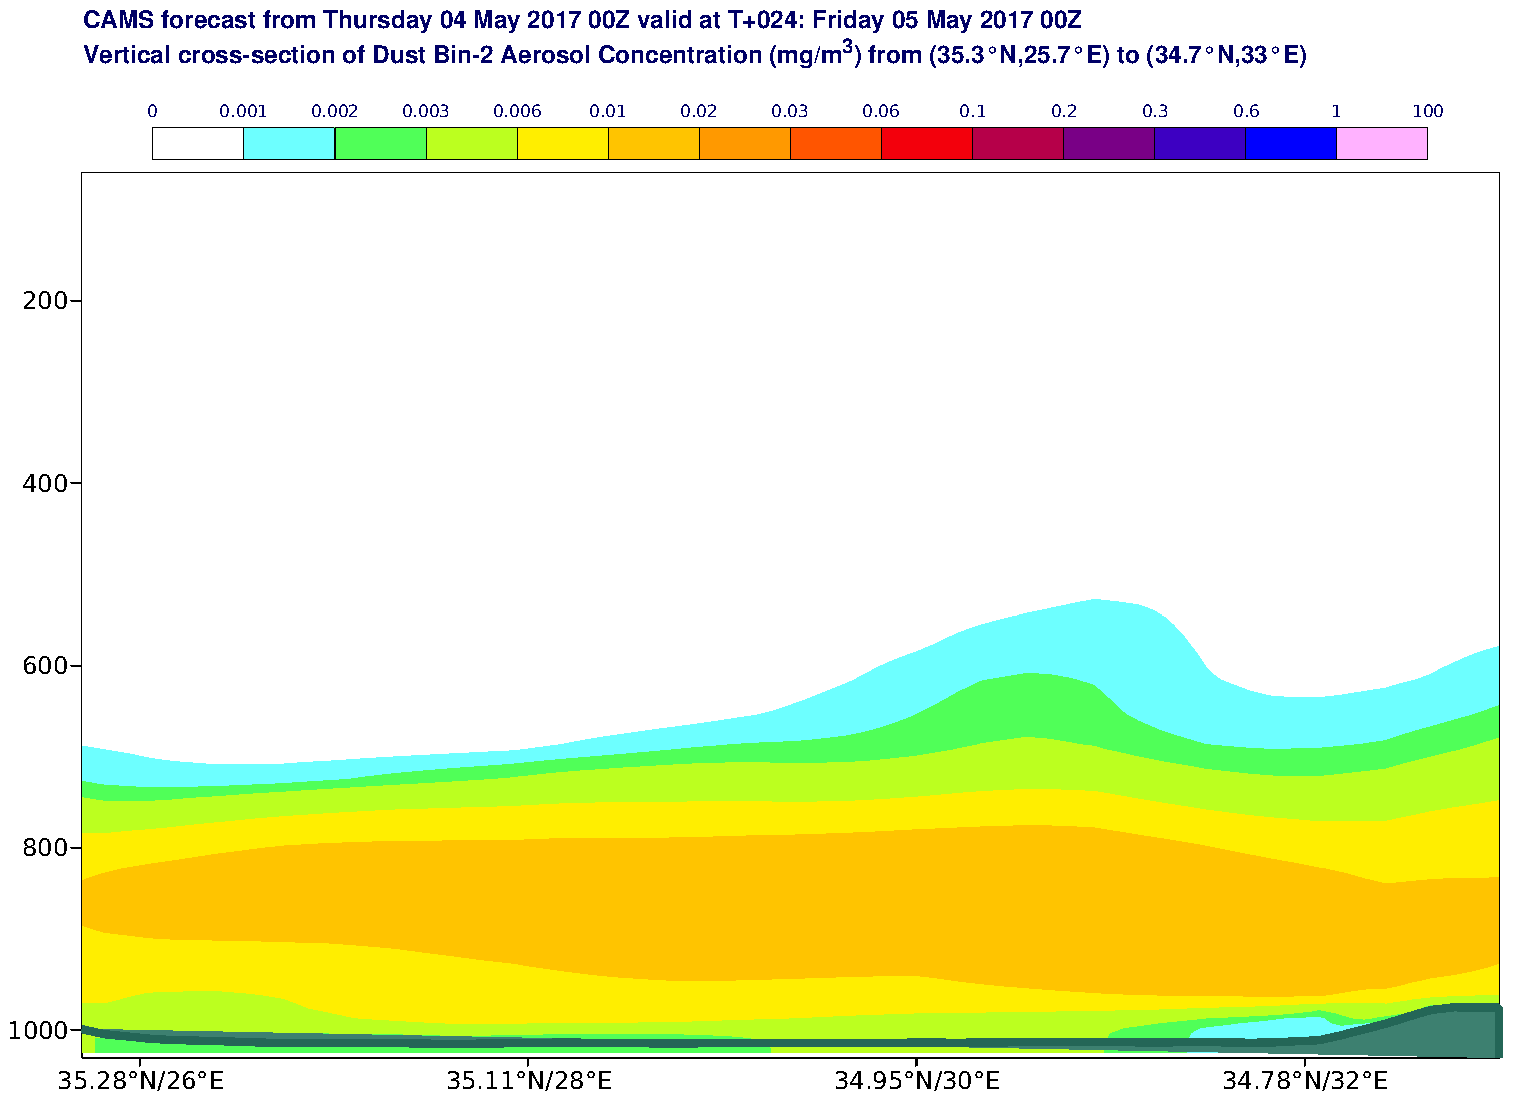 Vertical cross-section of Dust Bin-2 Aerosol Concentration (mg/m3) valid at T24 - 2017-05-05 00:00